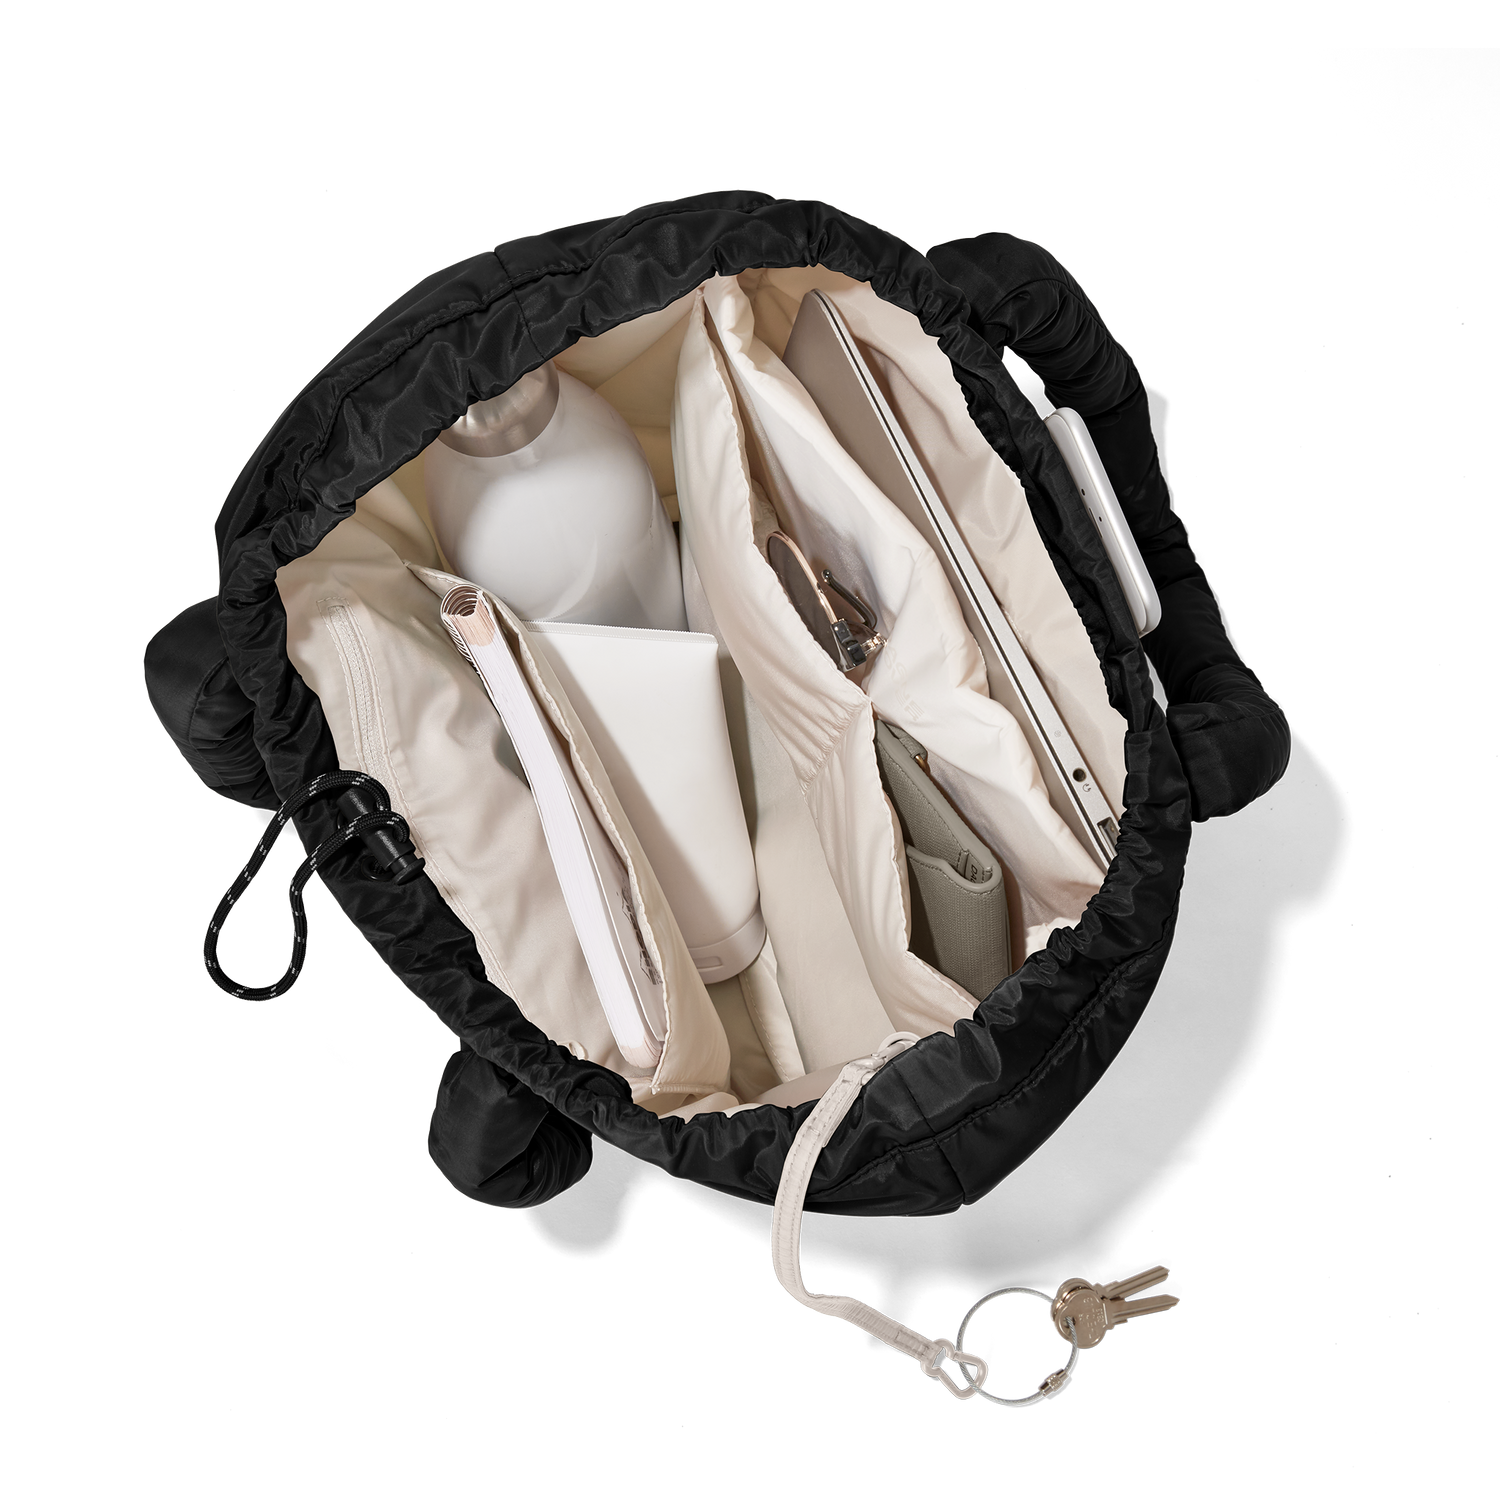 Review: Dagne Dover's Kal Puff Drawstring Tote Is Truly A+